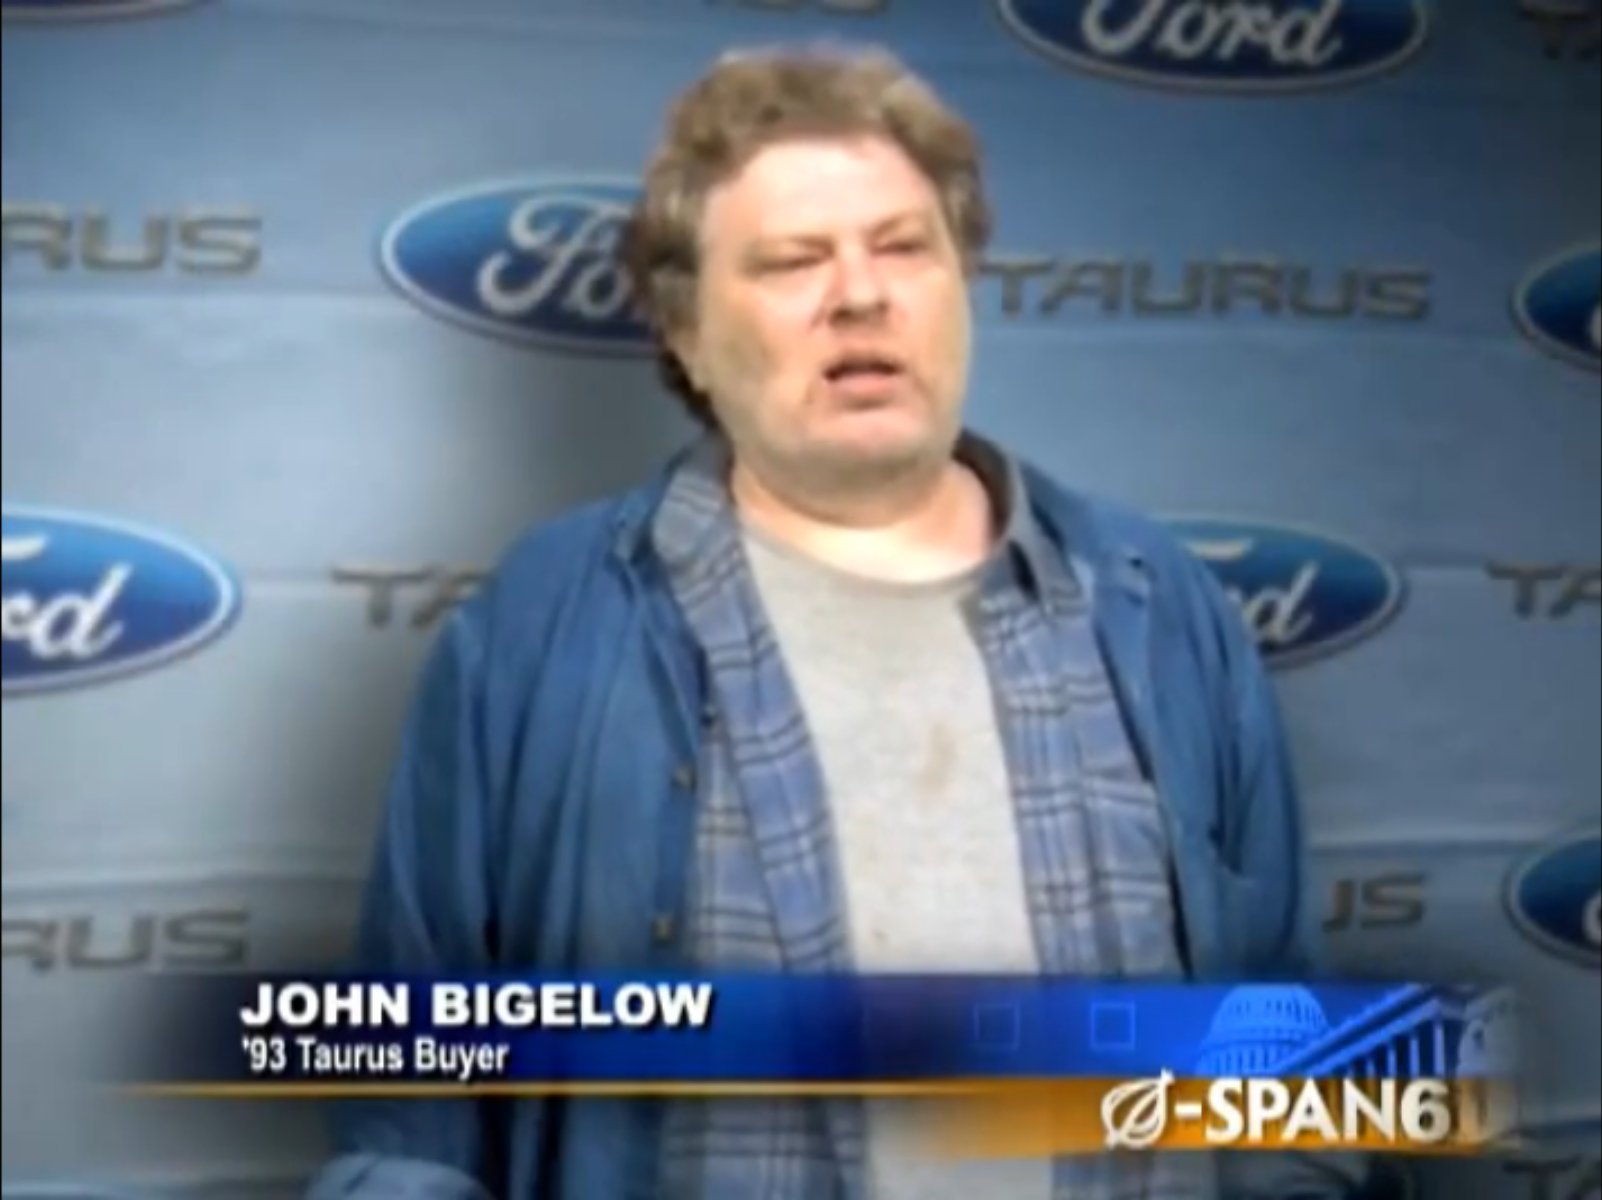 Joe Hansard as John Bigelow in The Onion webisode entitled Ford Unveils New Car For Cash-Strapped Buyers: The 1993 Taurus. November 5, 2009.